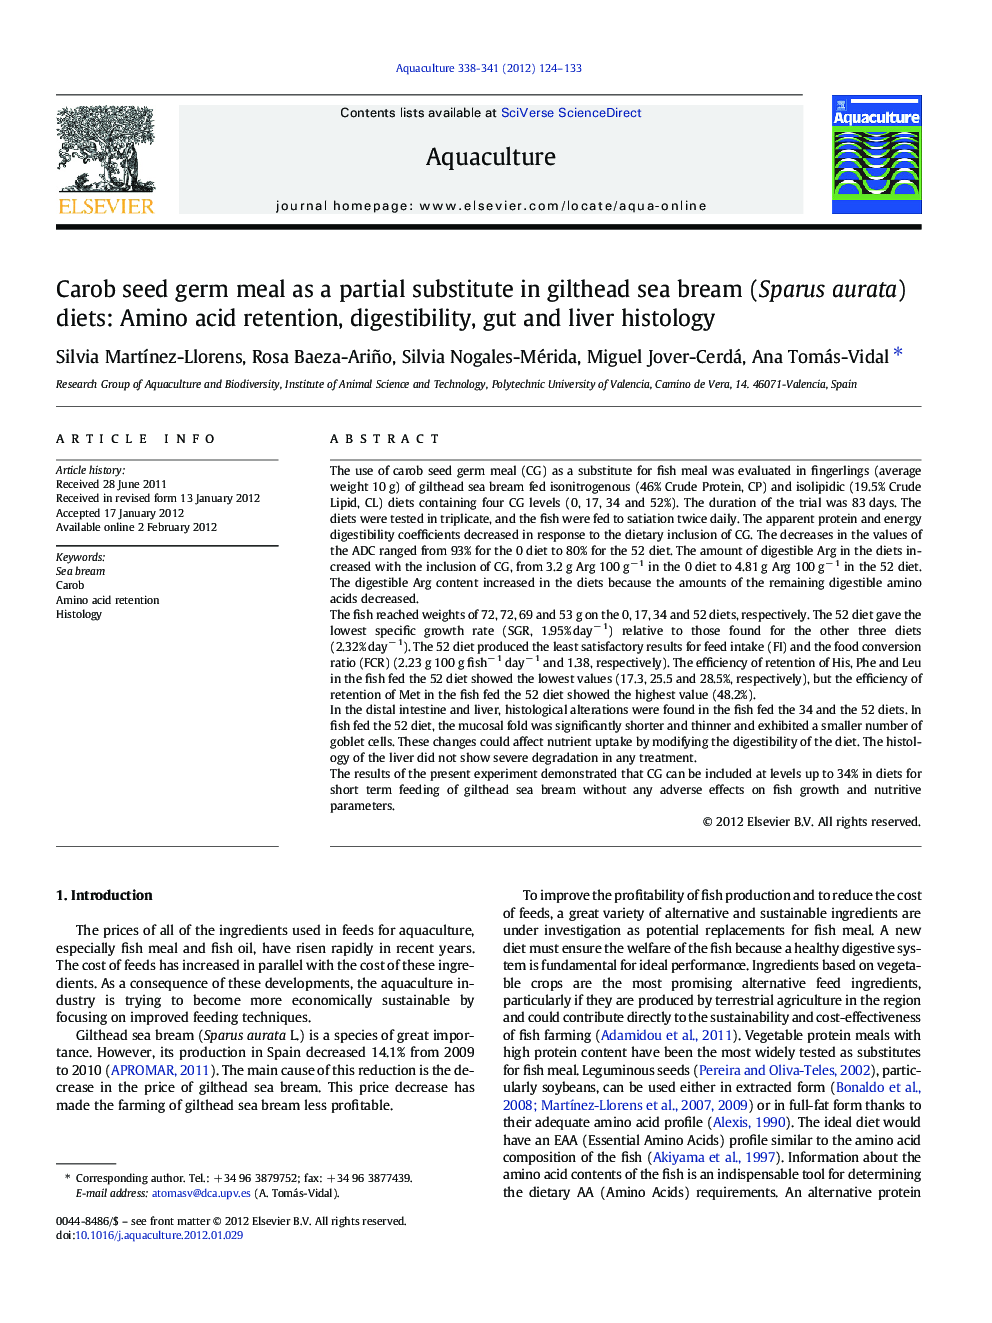 Carob seed germ meal as a partial substitute in gilthead sea bream (Sparus aurata) diets: Amino acid retention, digestibility, gut and liver histology